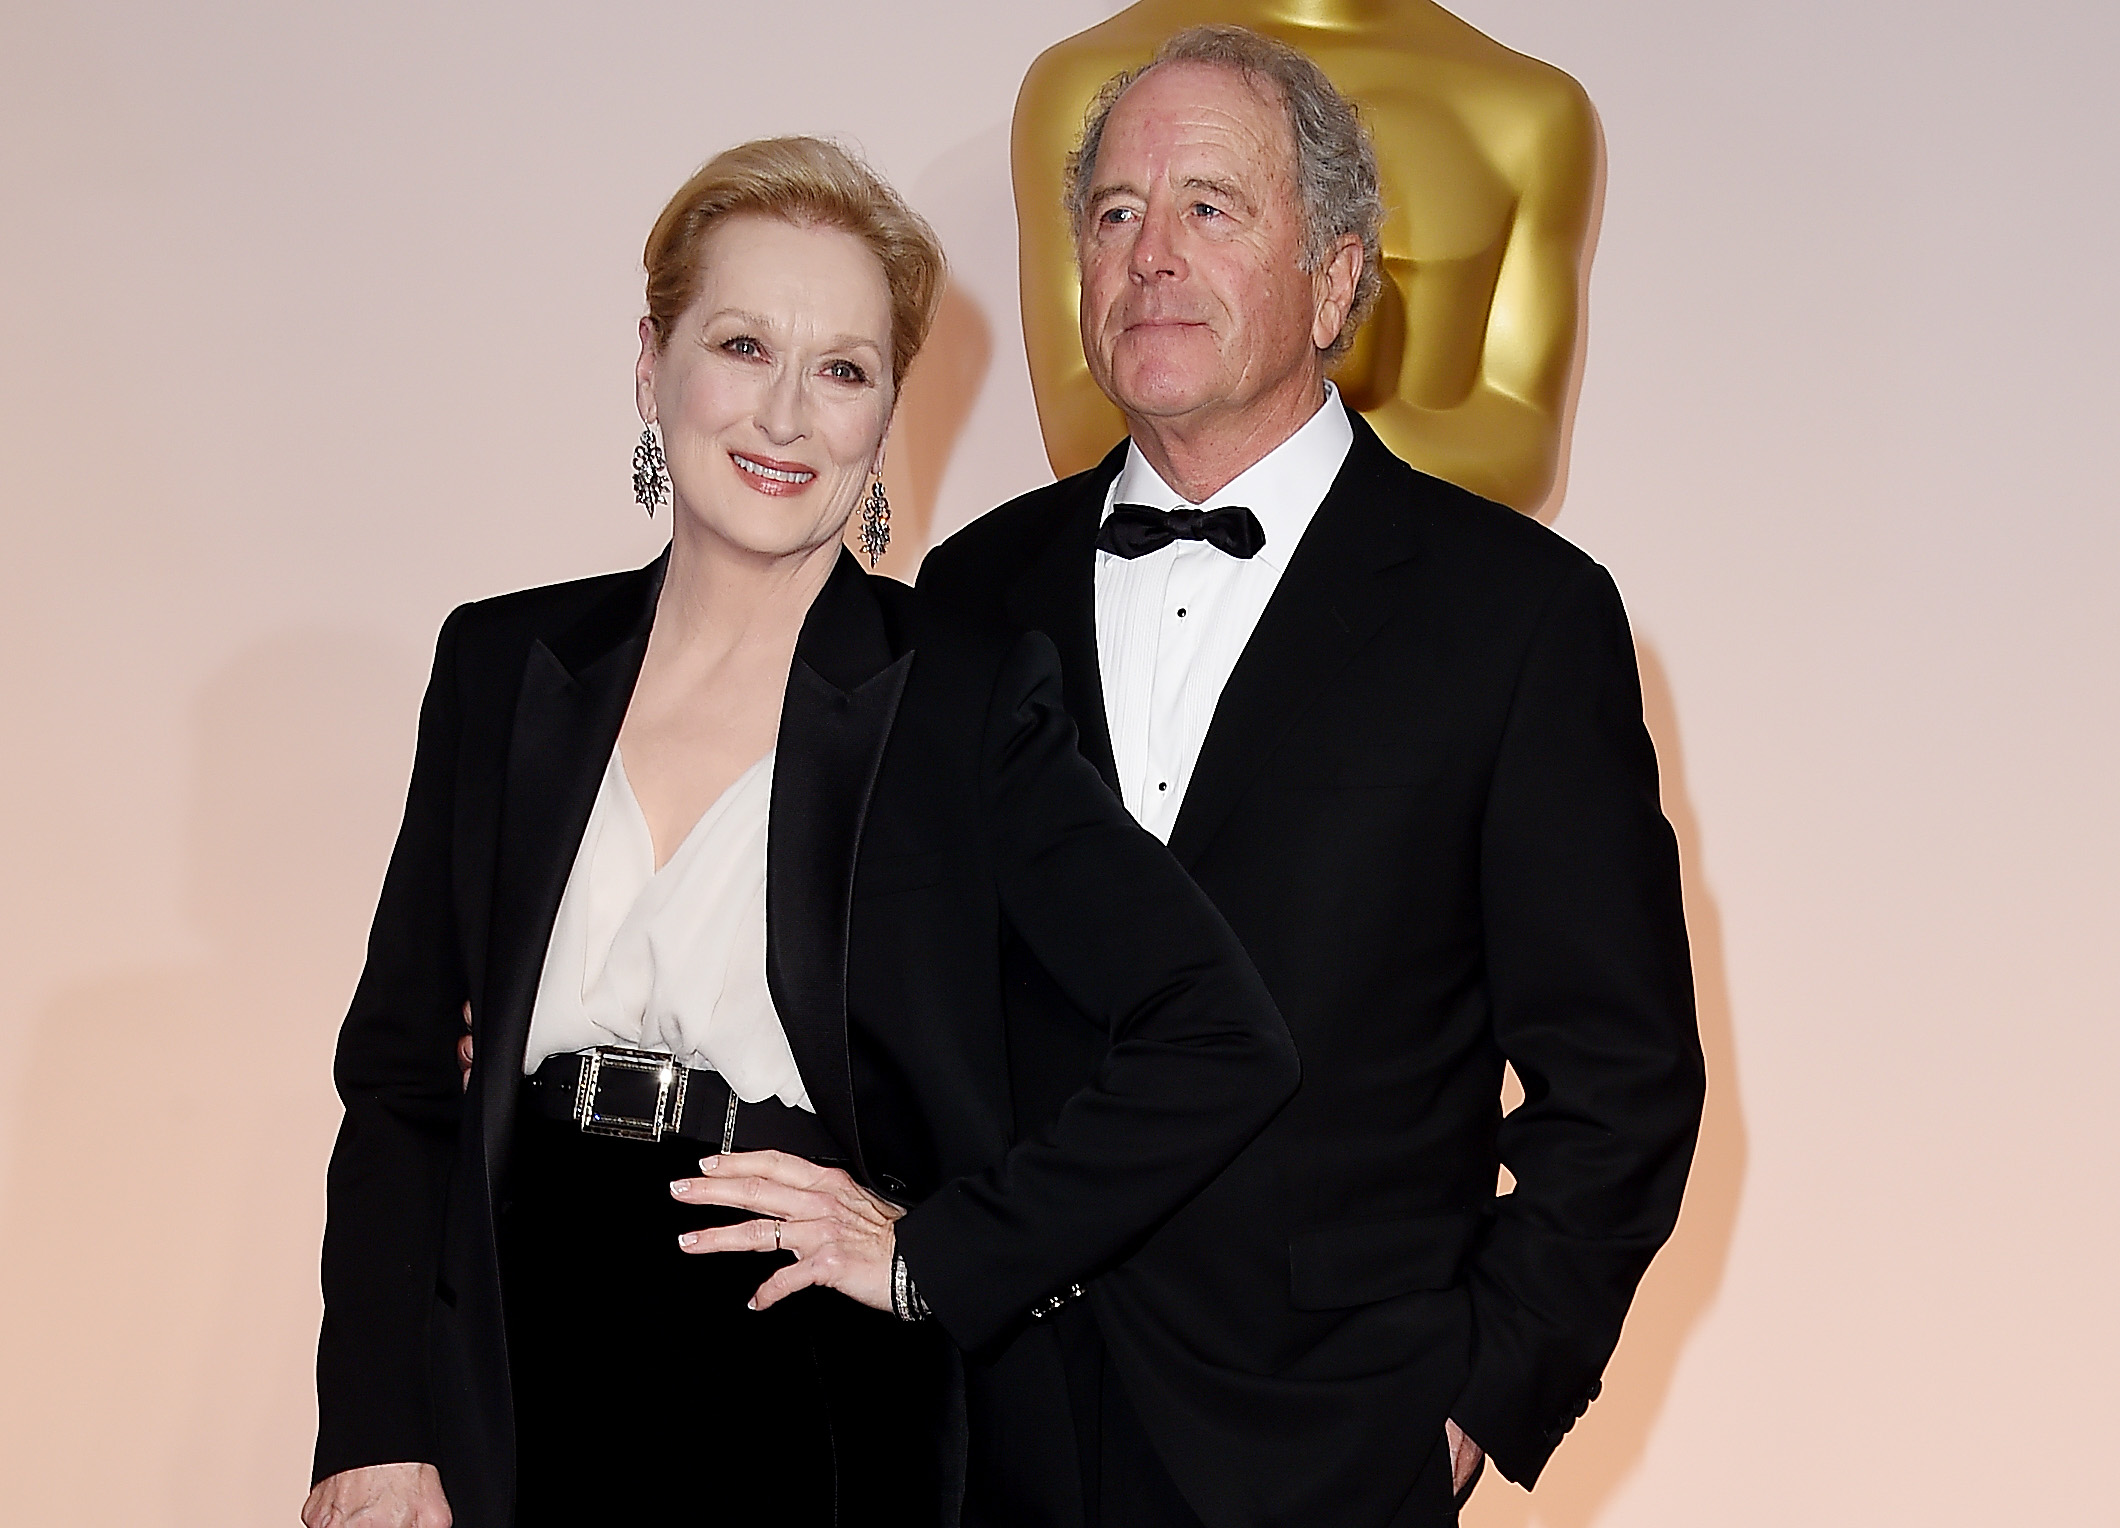 Actor Meryl Streep (L) and sculptor Don Gummer attend the 87th Annual Academy Awards at Hollywood & Highland Center on February 22, 2015 in Hollywood, California. | Source: Getty Images